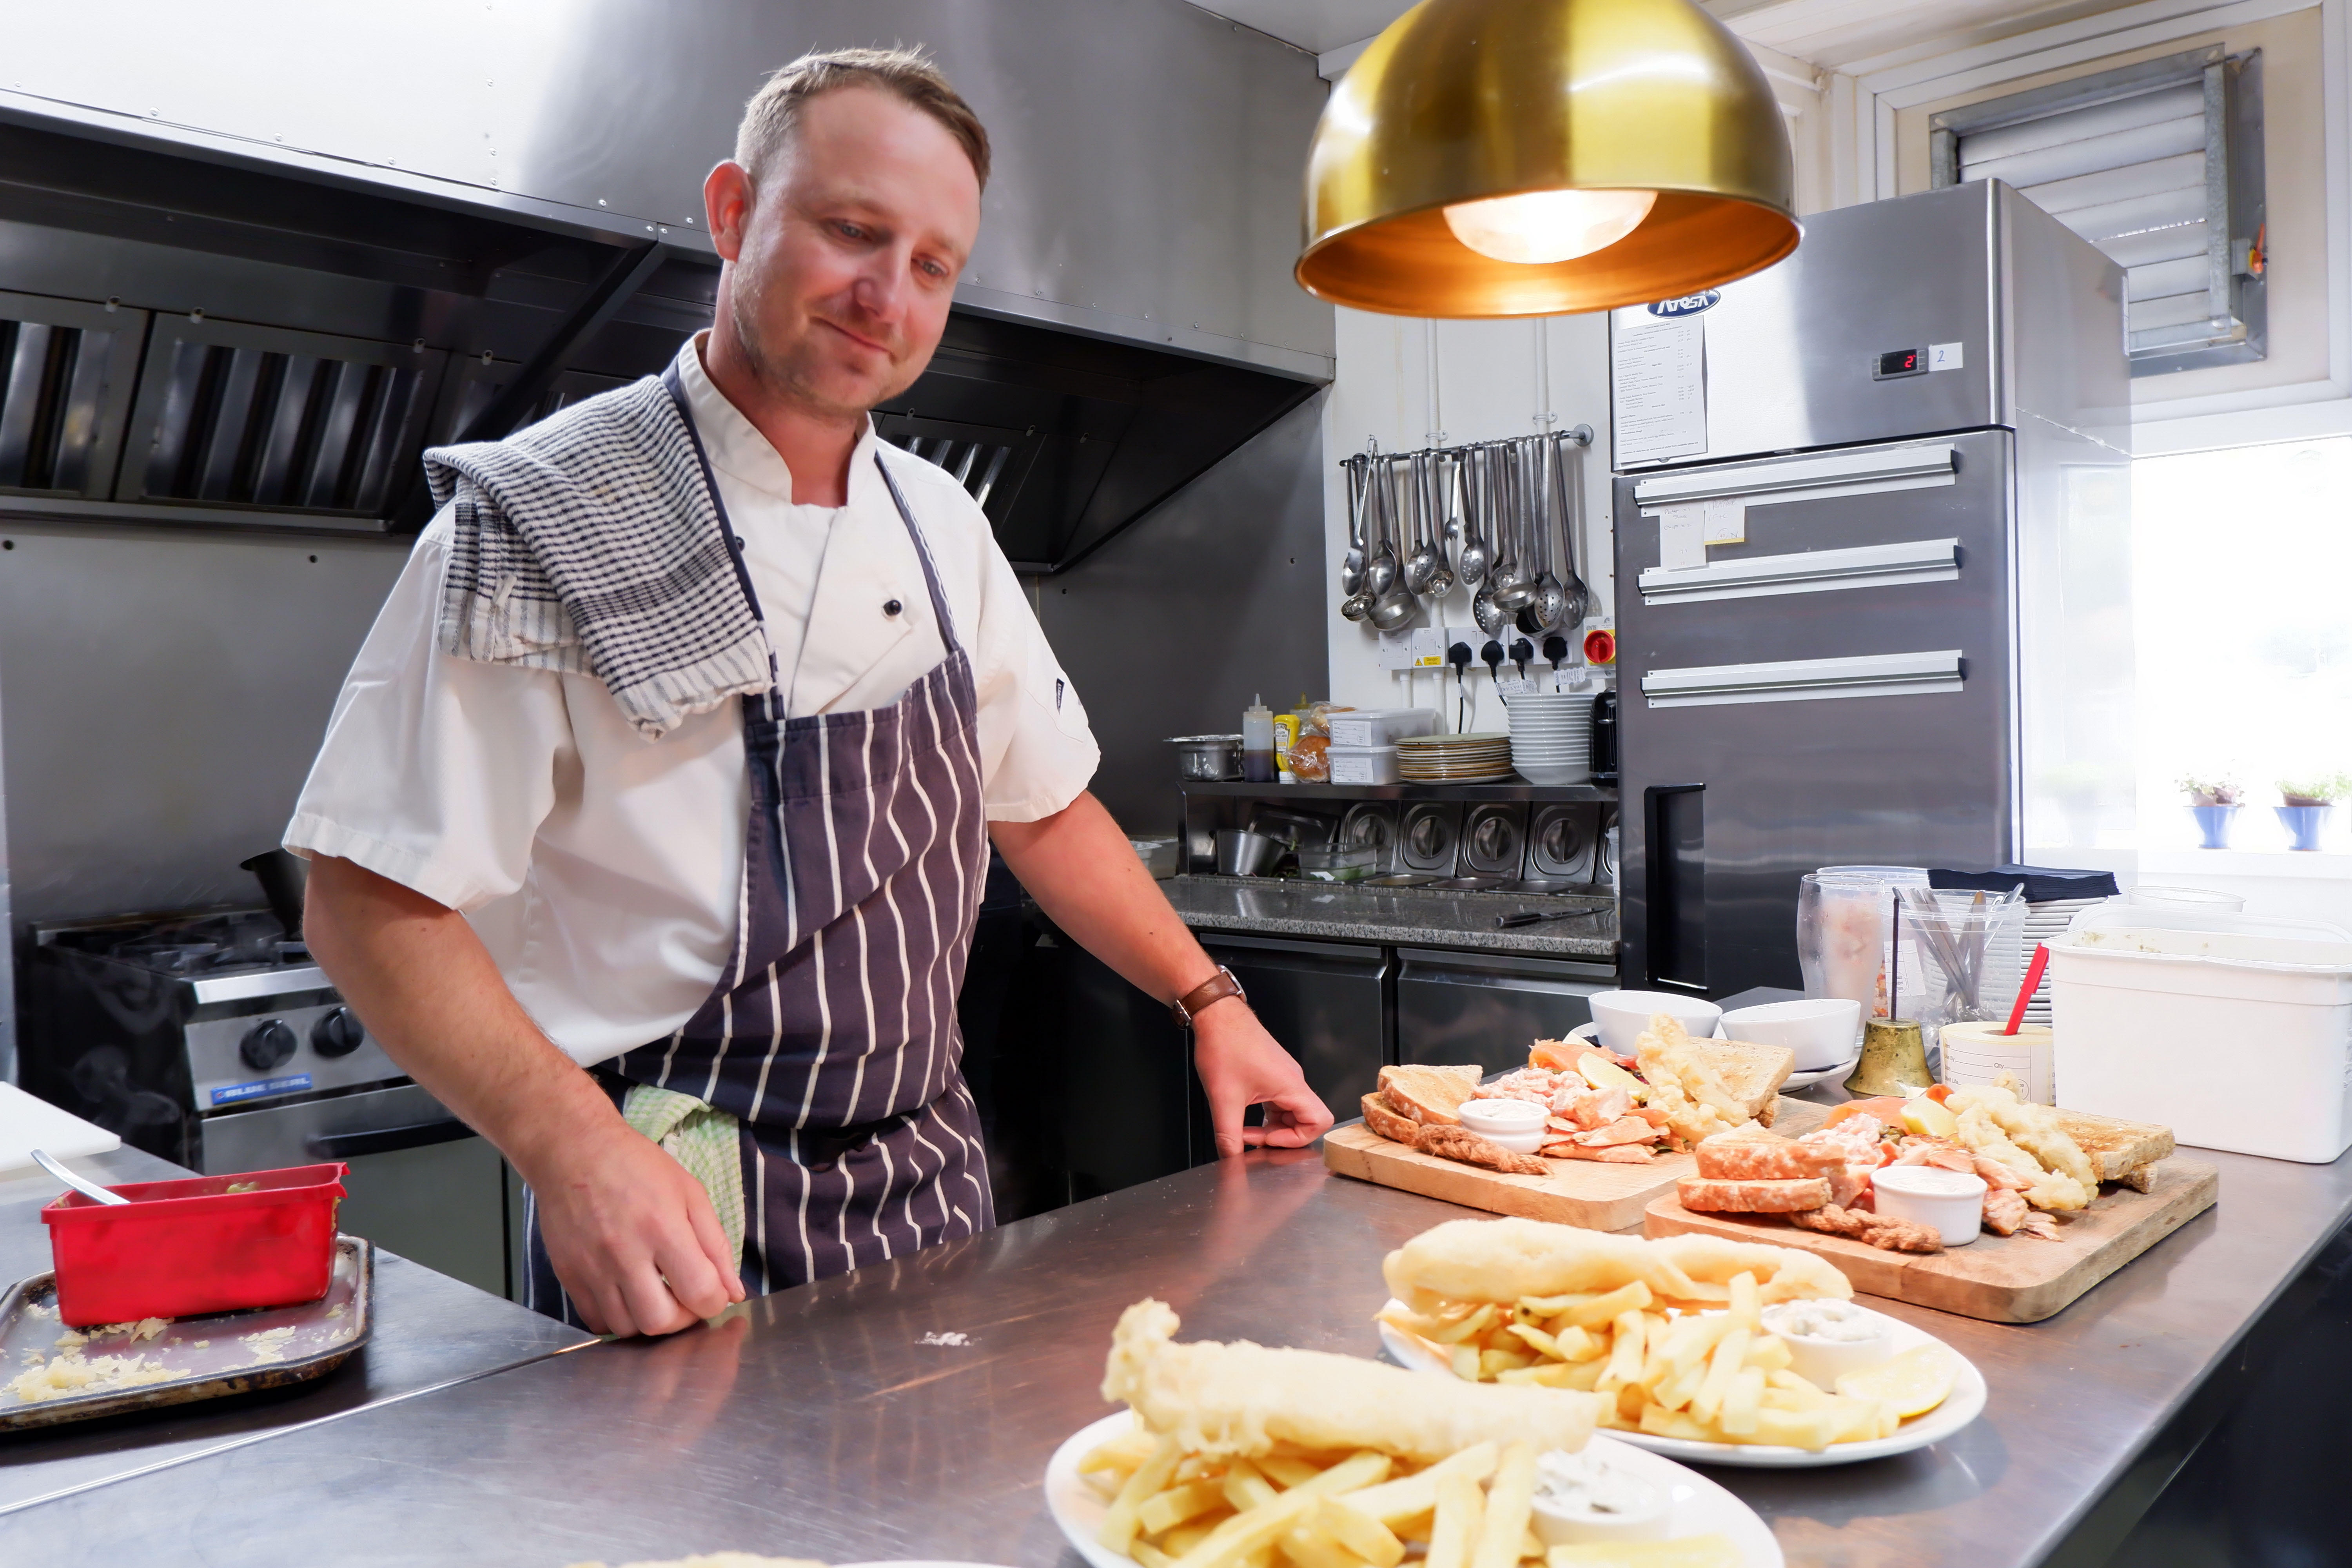 Chef with food in pub kitchen